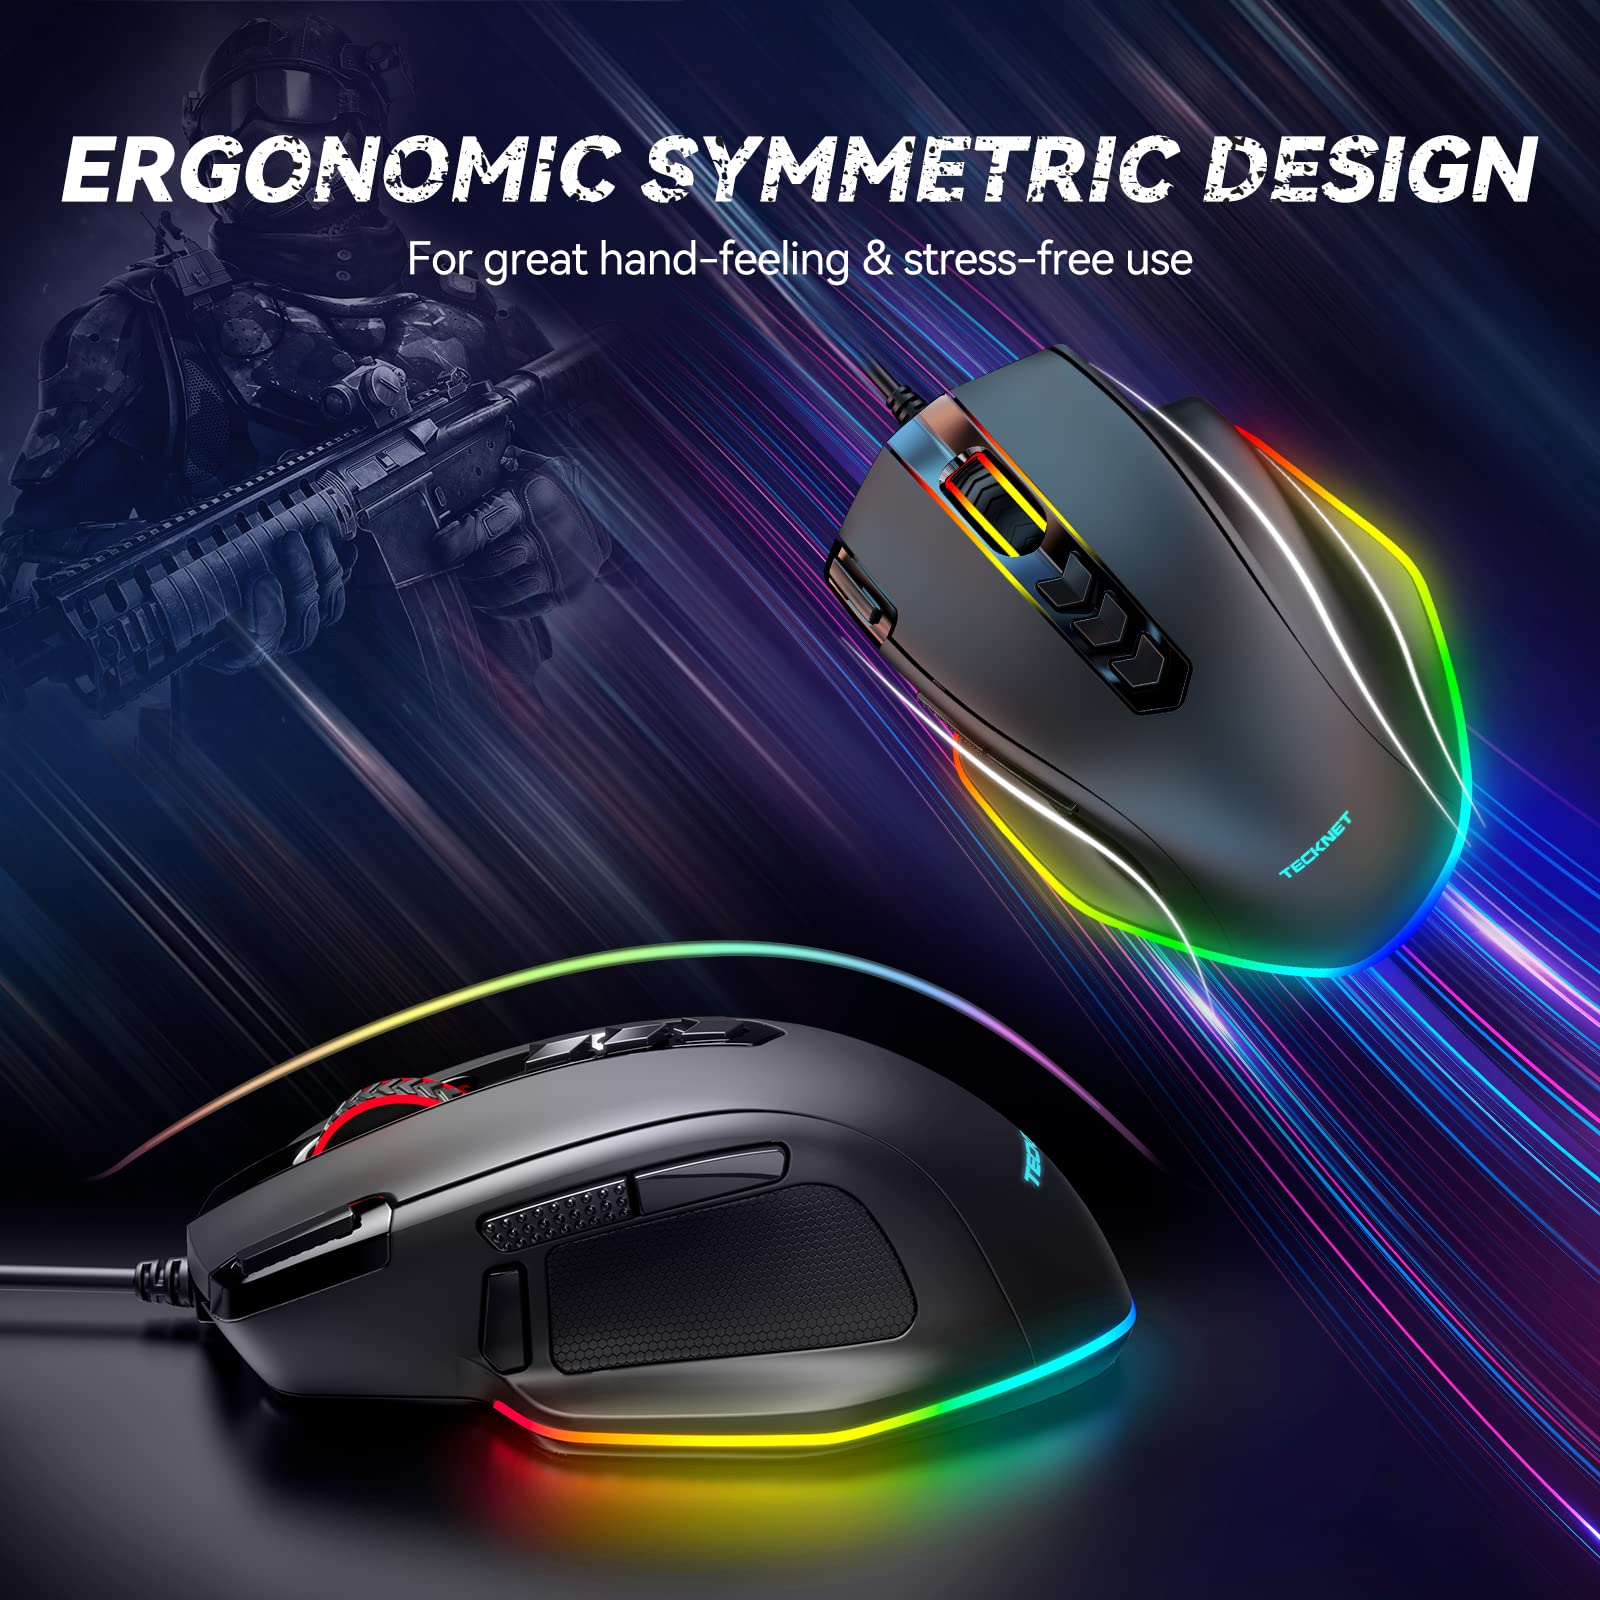 TECKNET Wired Gaming Mouse, Ergonomic Gaming Mouse with 8000DPI, RGB Computer Mice with 11 Programmable Buttons, PC Gaming Mice for Notebook Laptop Mac Book, Fire Button(Ratón de juego)